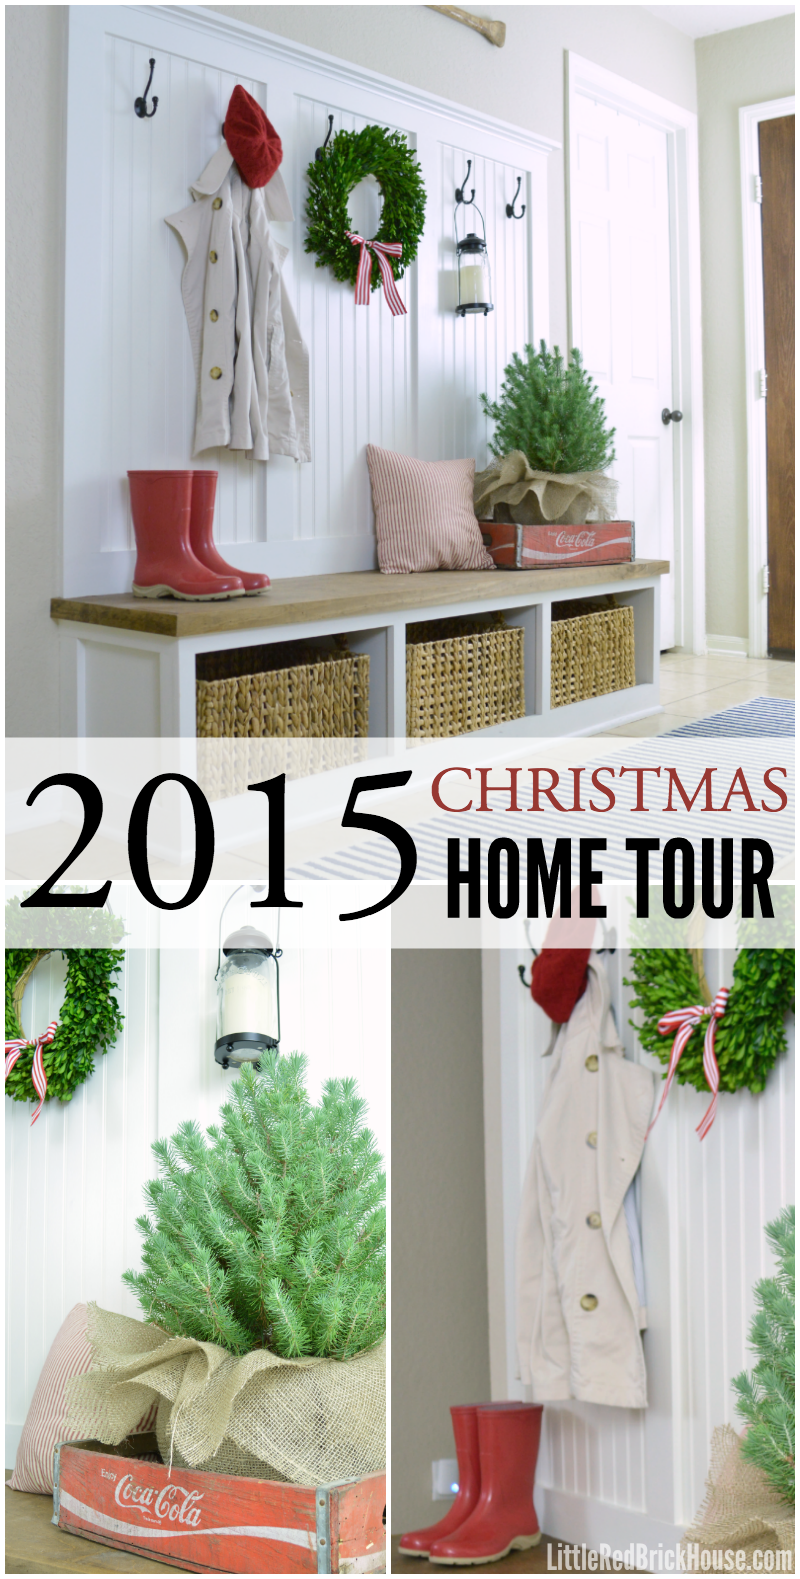 Christmas 2015 Home Tour Part 1 | LITTLE RED BRICK HOUSE